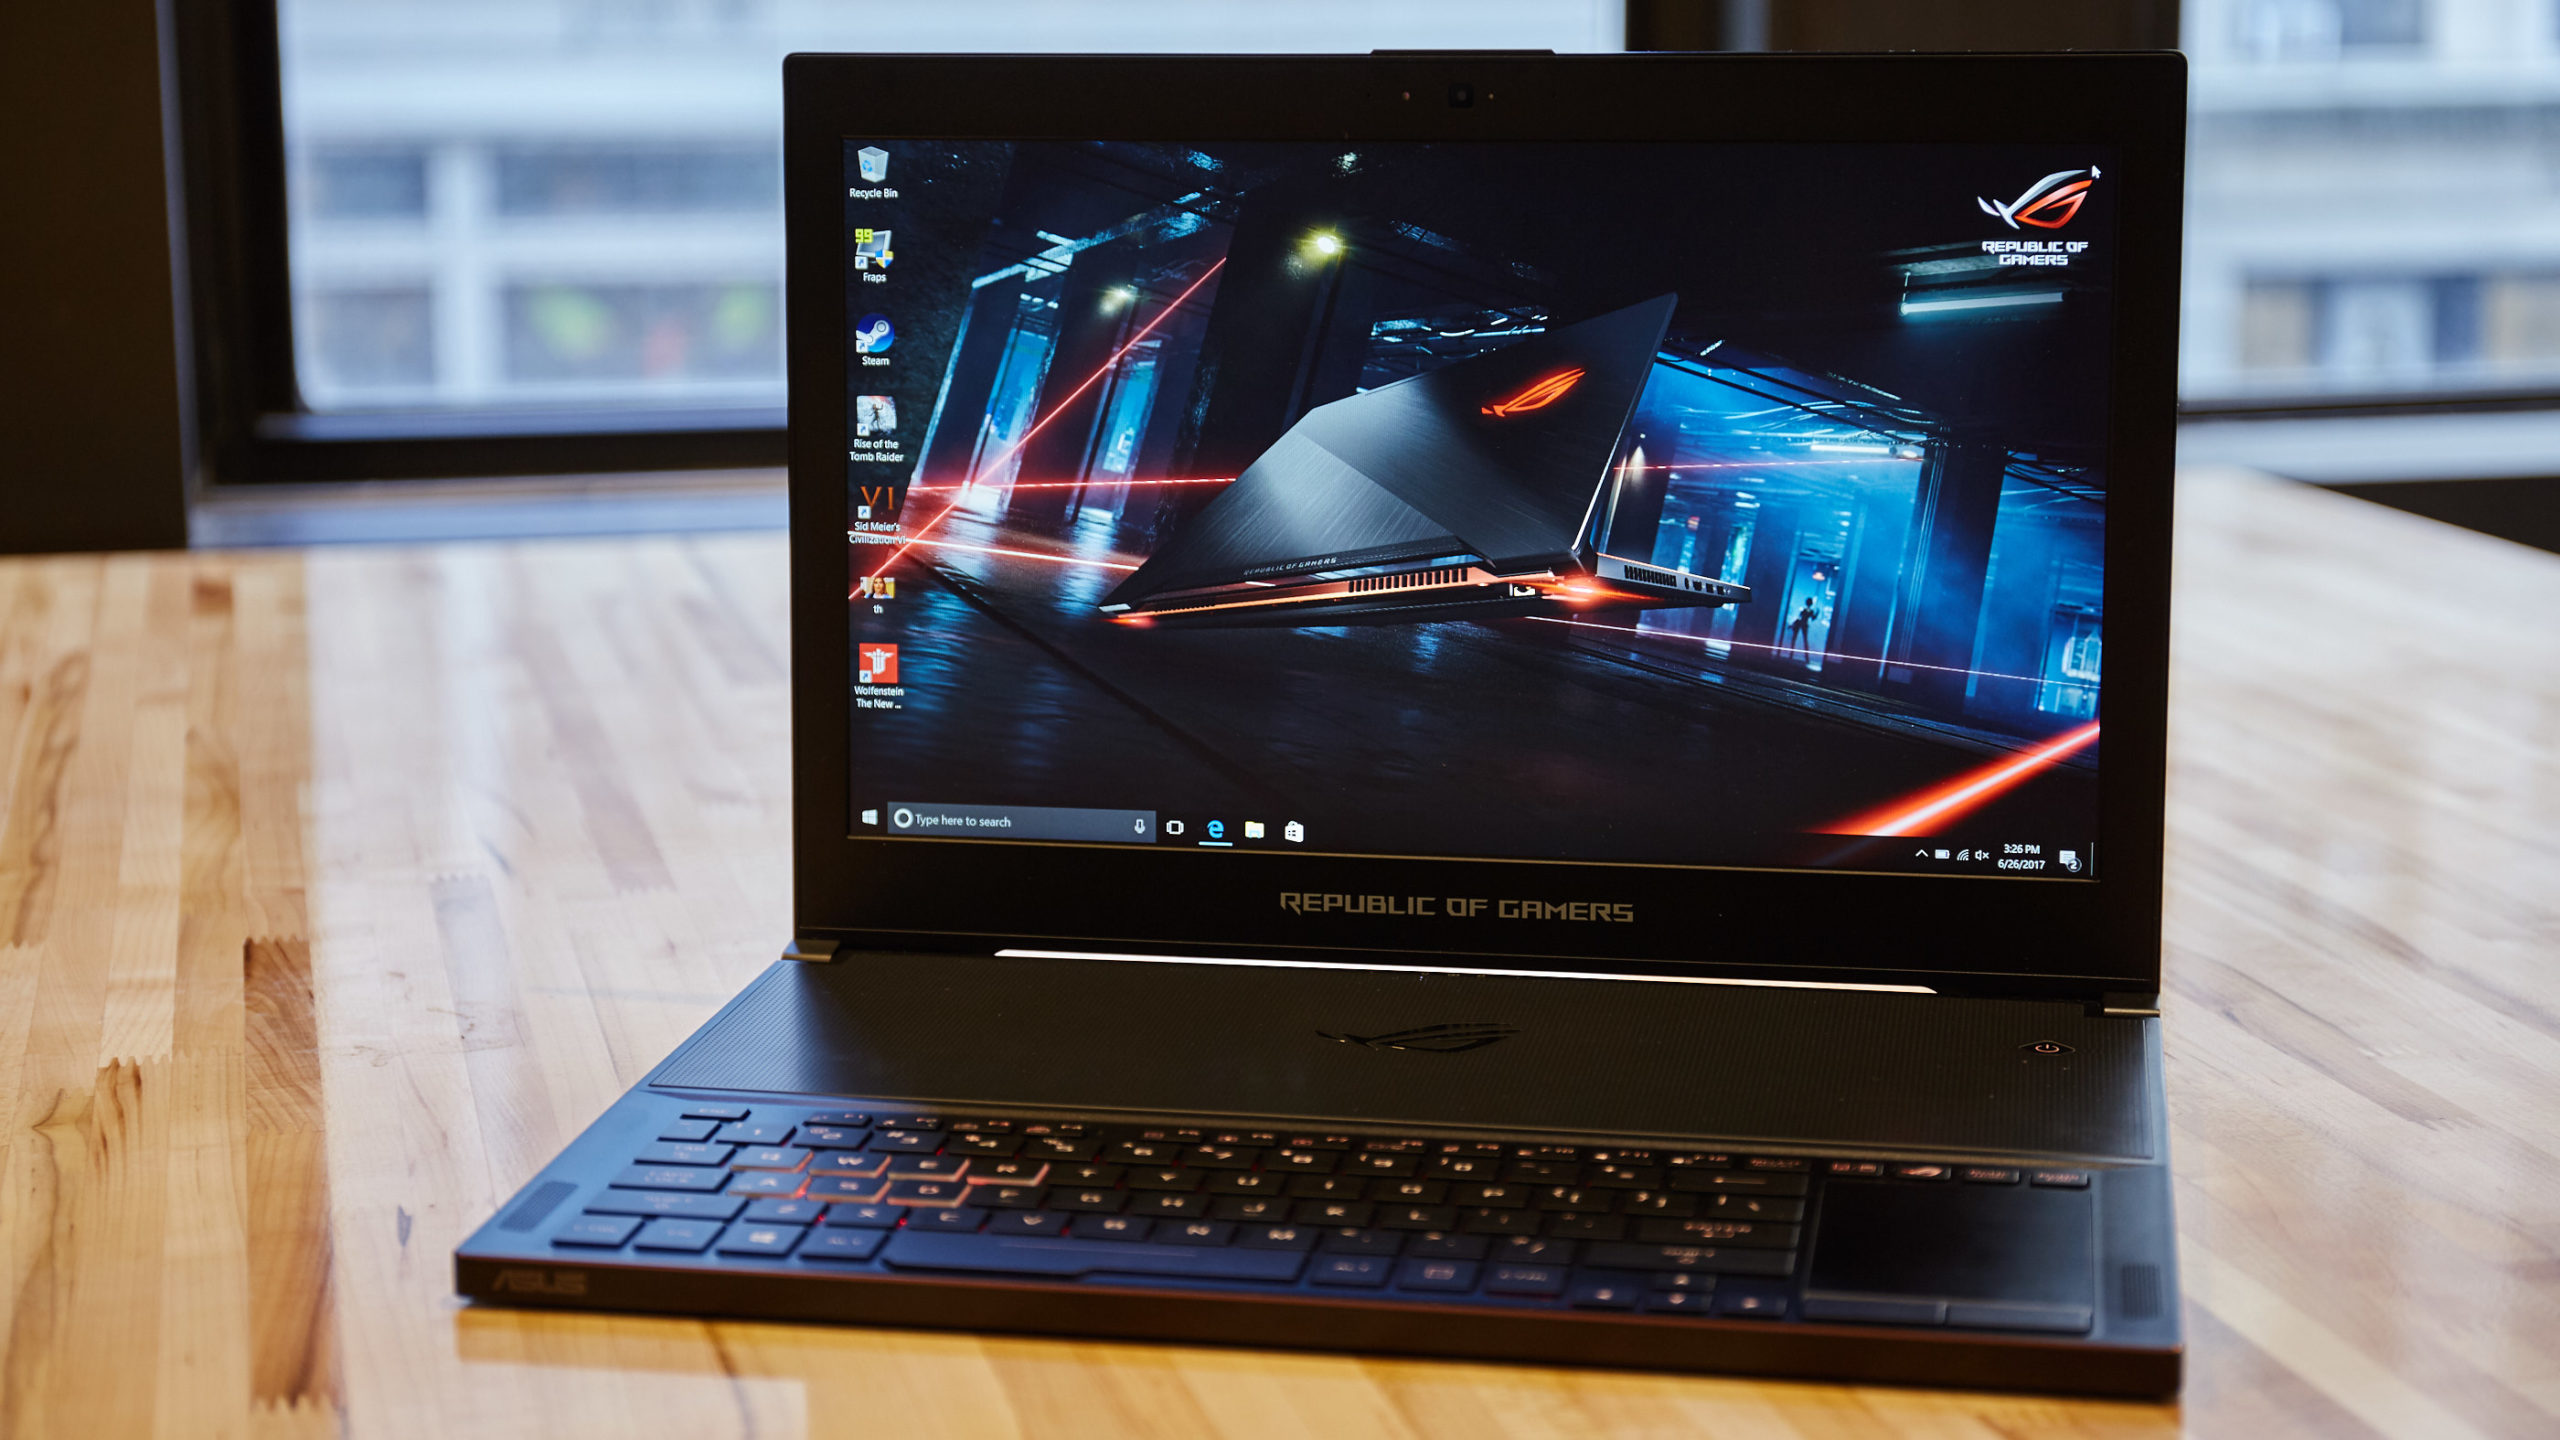 Asus Zephyrus Review: Has The Age Of Powerful And Convenient Gaming Laptops Finally Arrived?